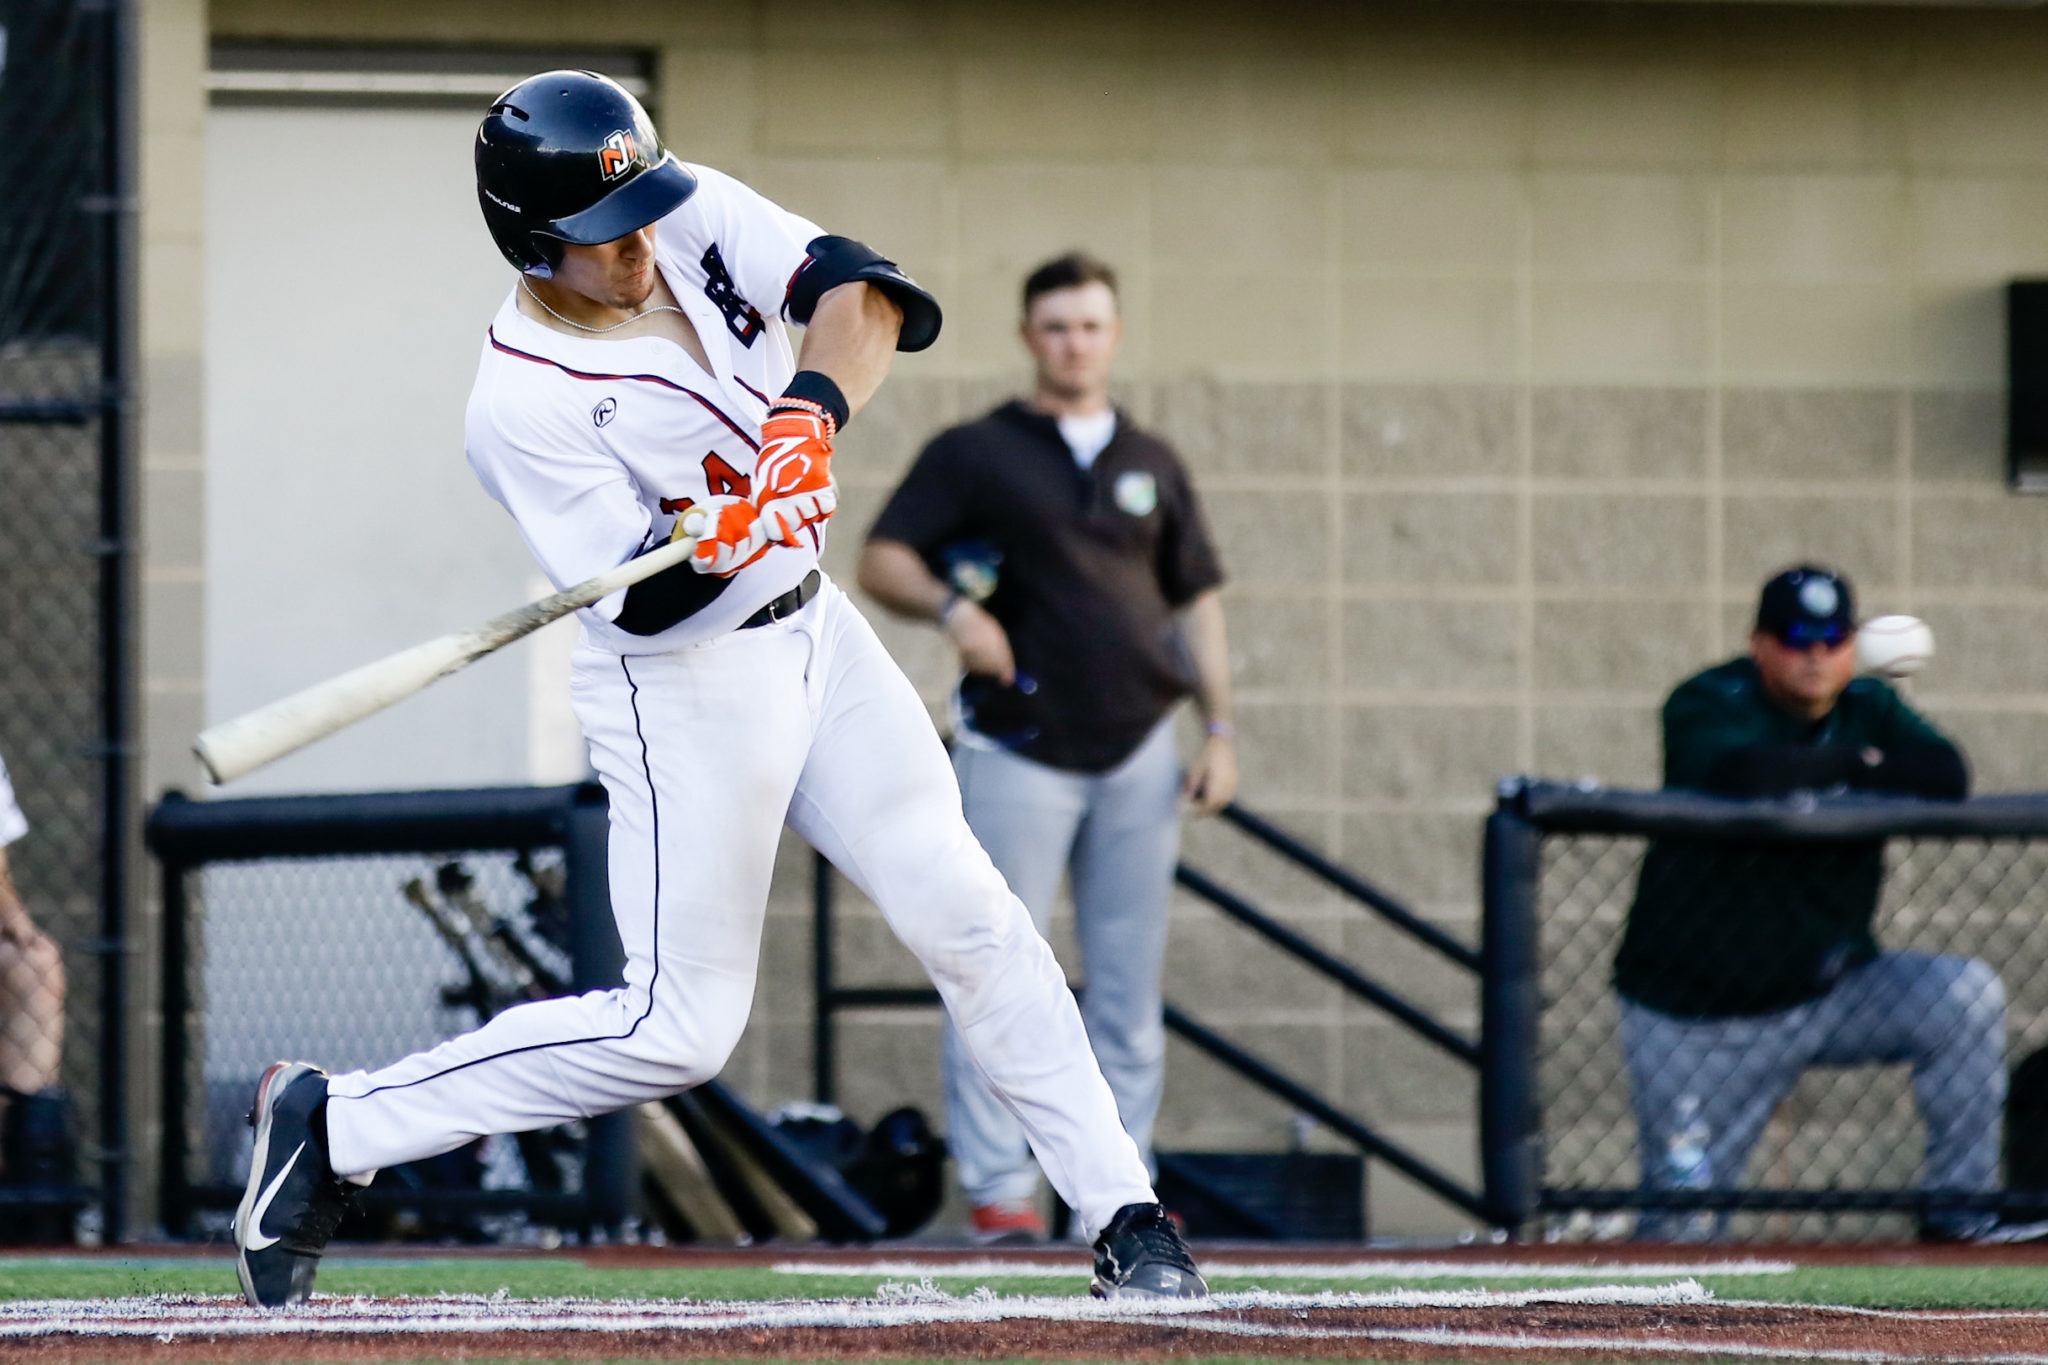 MoonDogs Sweep Loggers for Four Wins in a Row and Near-Perfect First ...